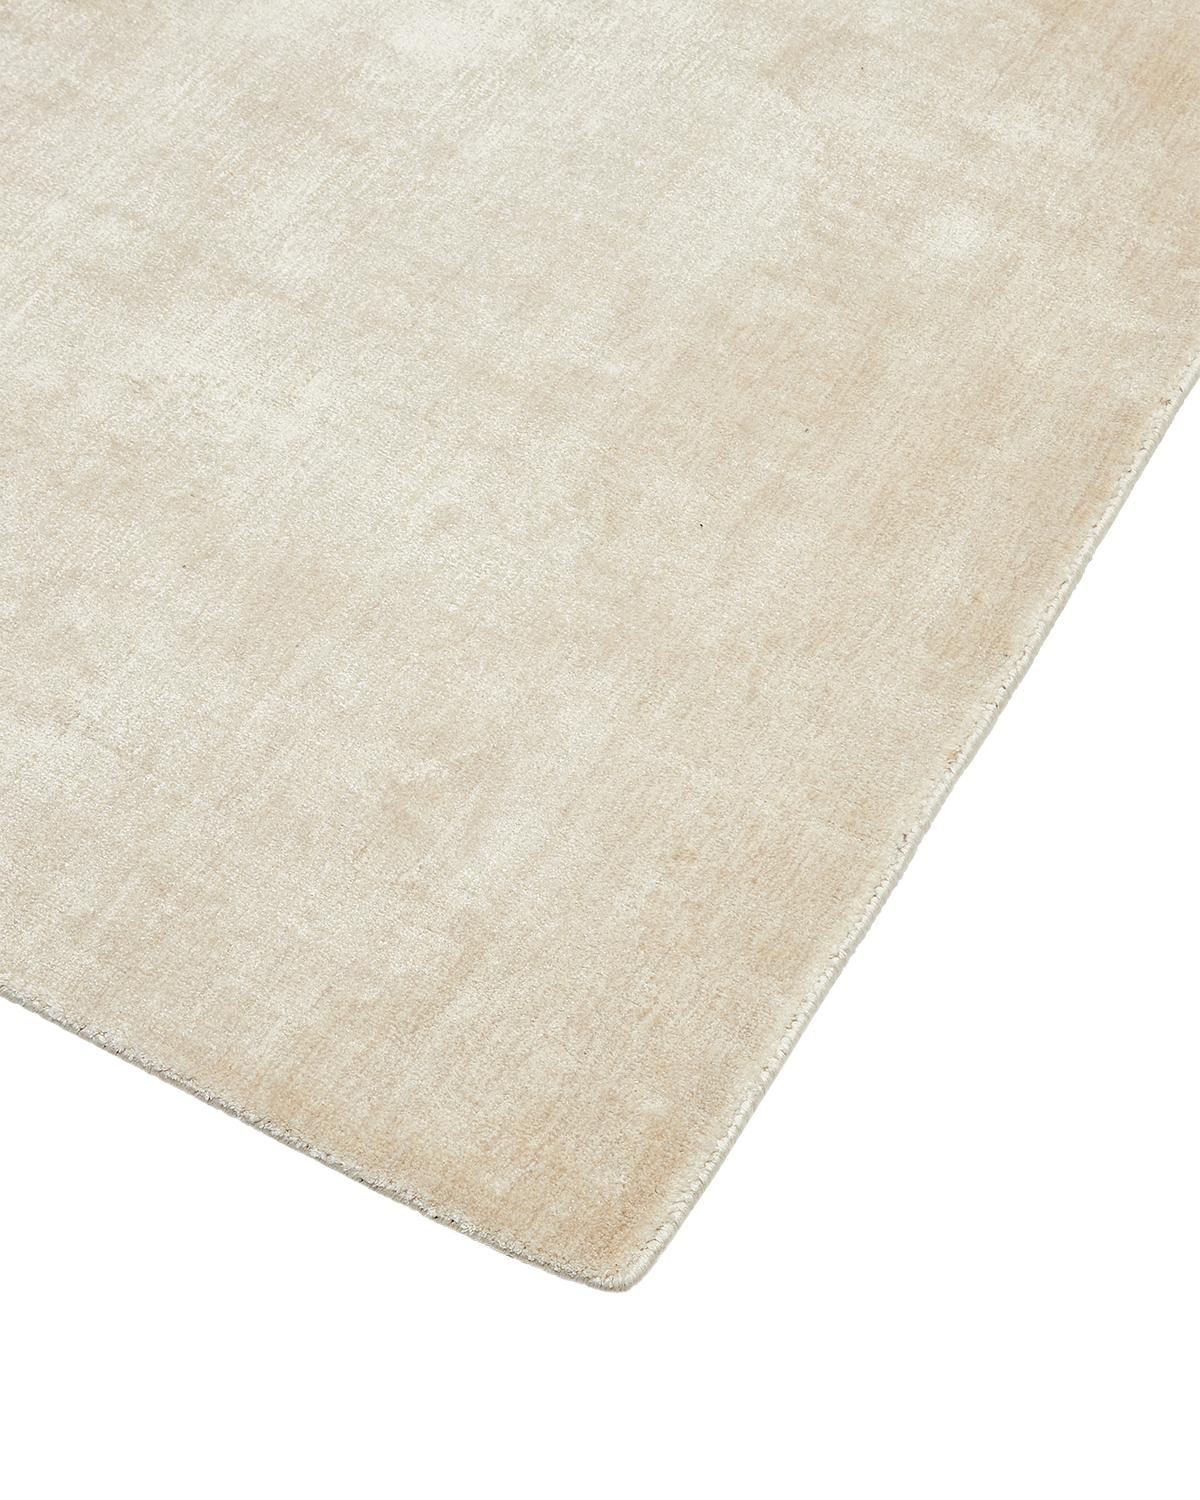 Color: Sepia - Made in: India. 65% linen, 35% viscose. Subtle tone-on-tone stripes give the solid collection a depth and sophistication all its own. These rugs can pull the disparate elements of a room into a beautifully cohesive whole; they can